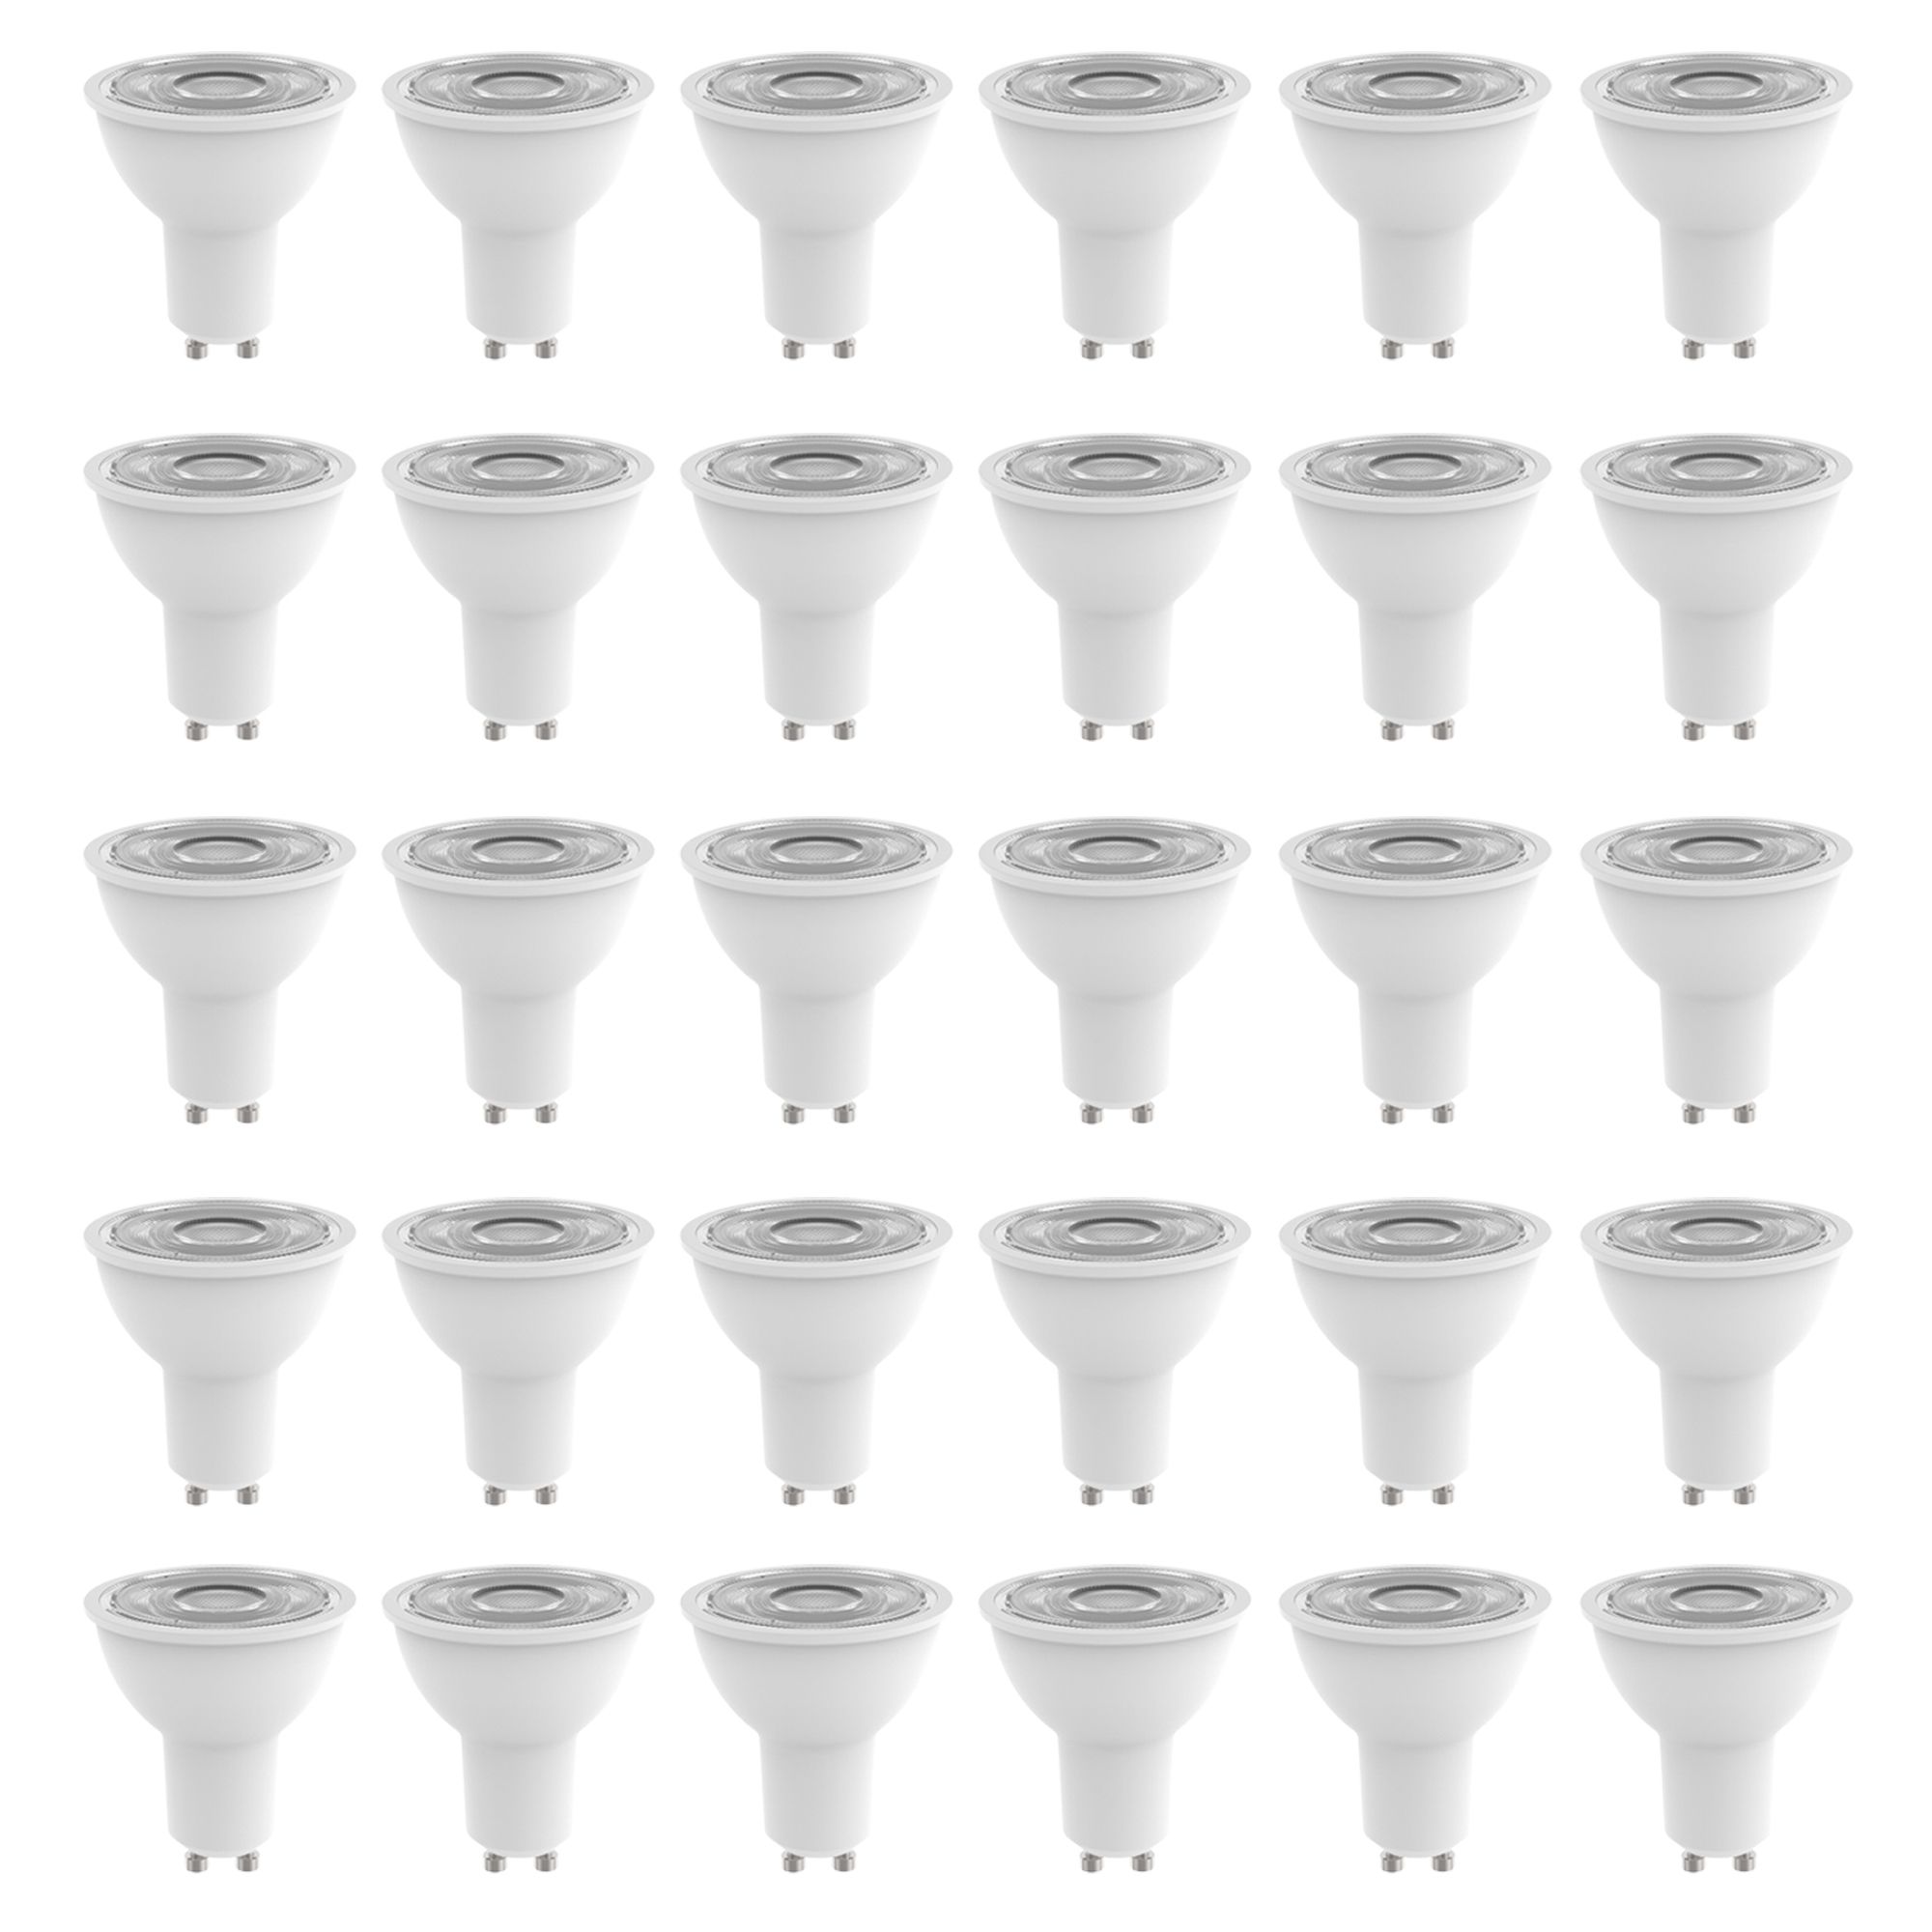 Diall 3.5W 345lm Reflector Warm white LED Light bulb, Pack of 30